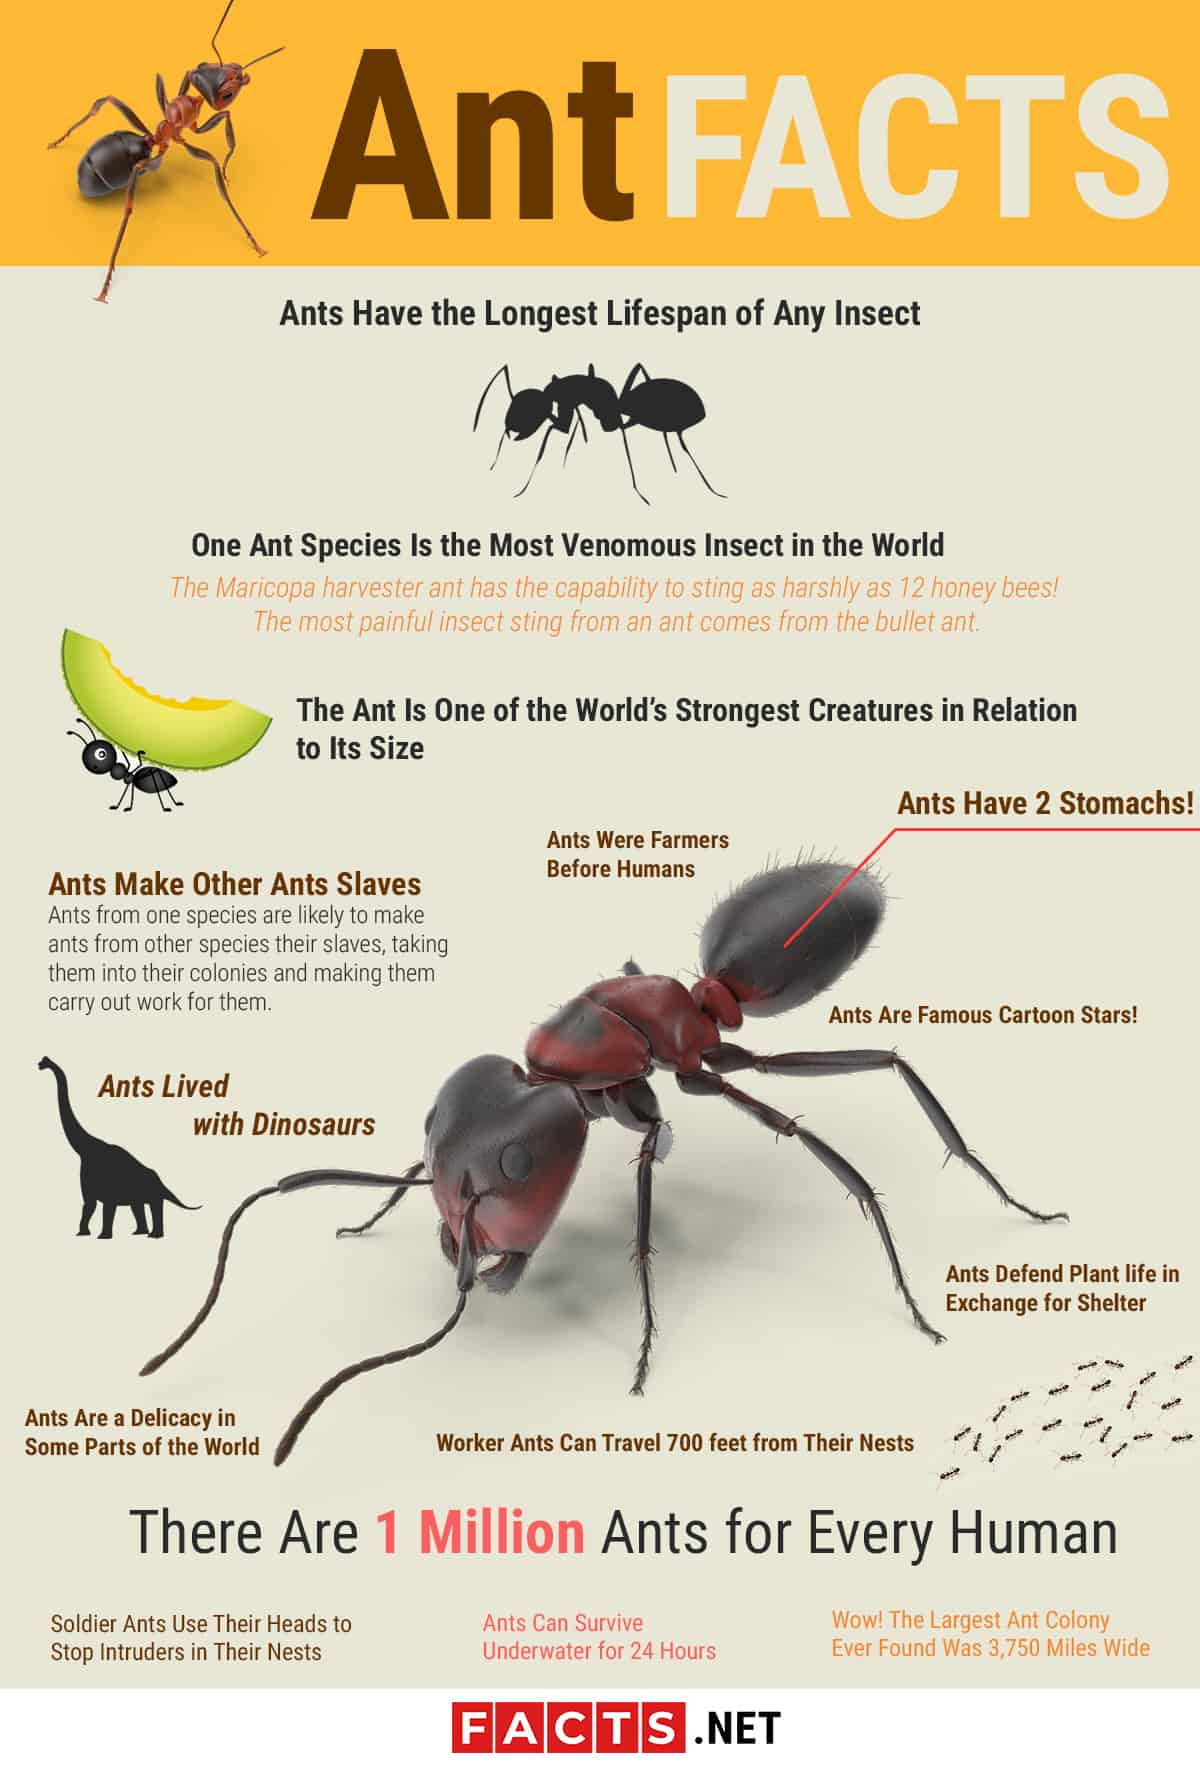 Top 15 Ant Facts - Biology, Lifespan, Diet & More 